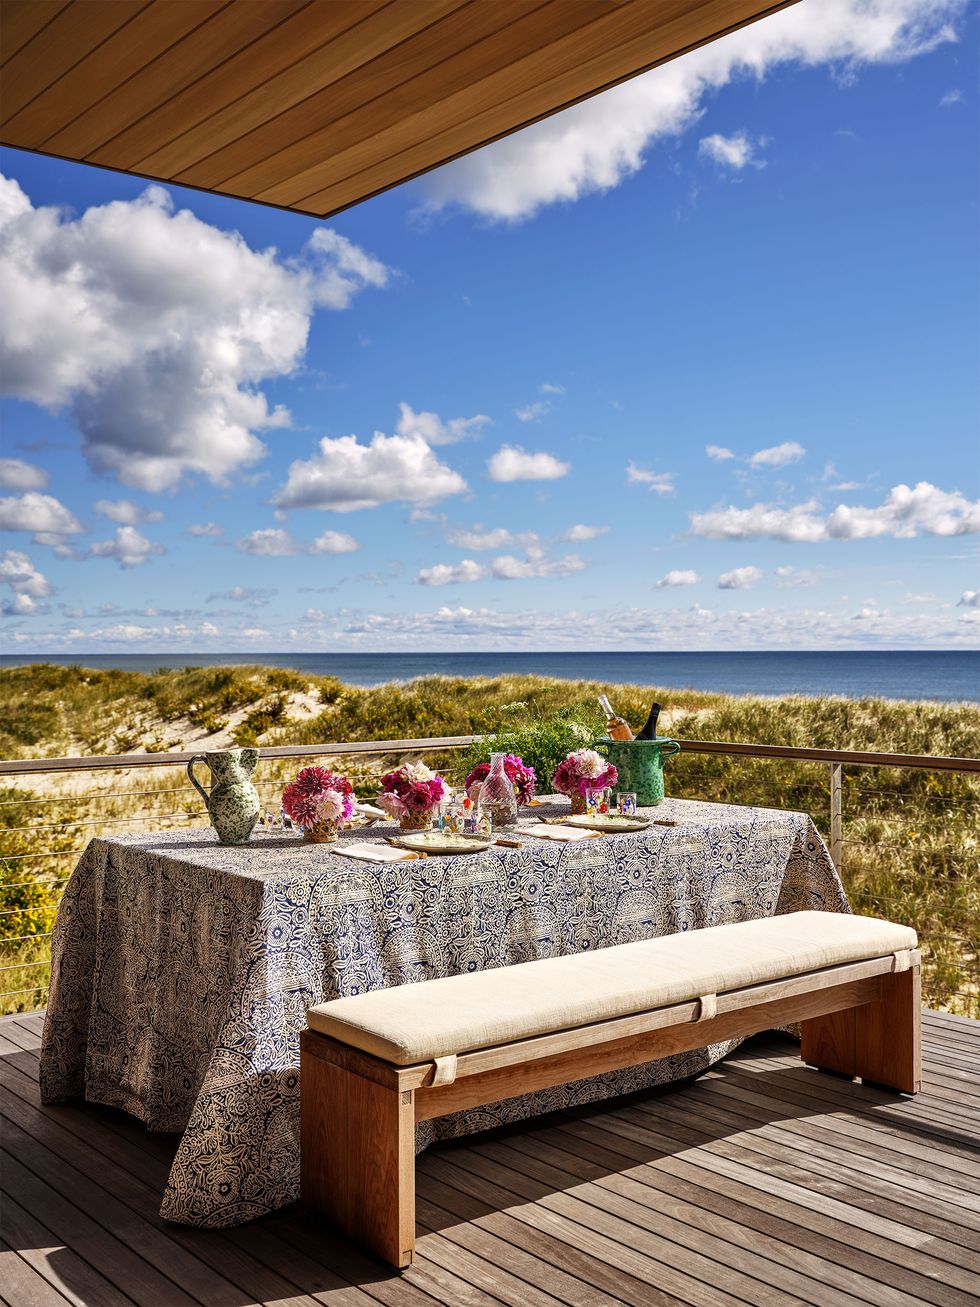 Wooden deck and wire railing overlooking the grassy dunes and sea, table with plates and flowers, printed tablecloth, bench with seat cushion